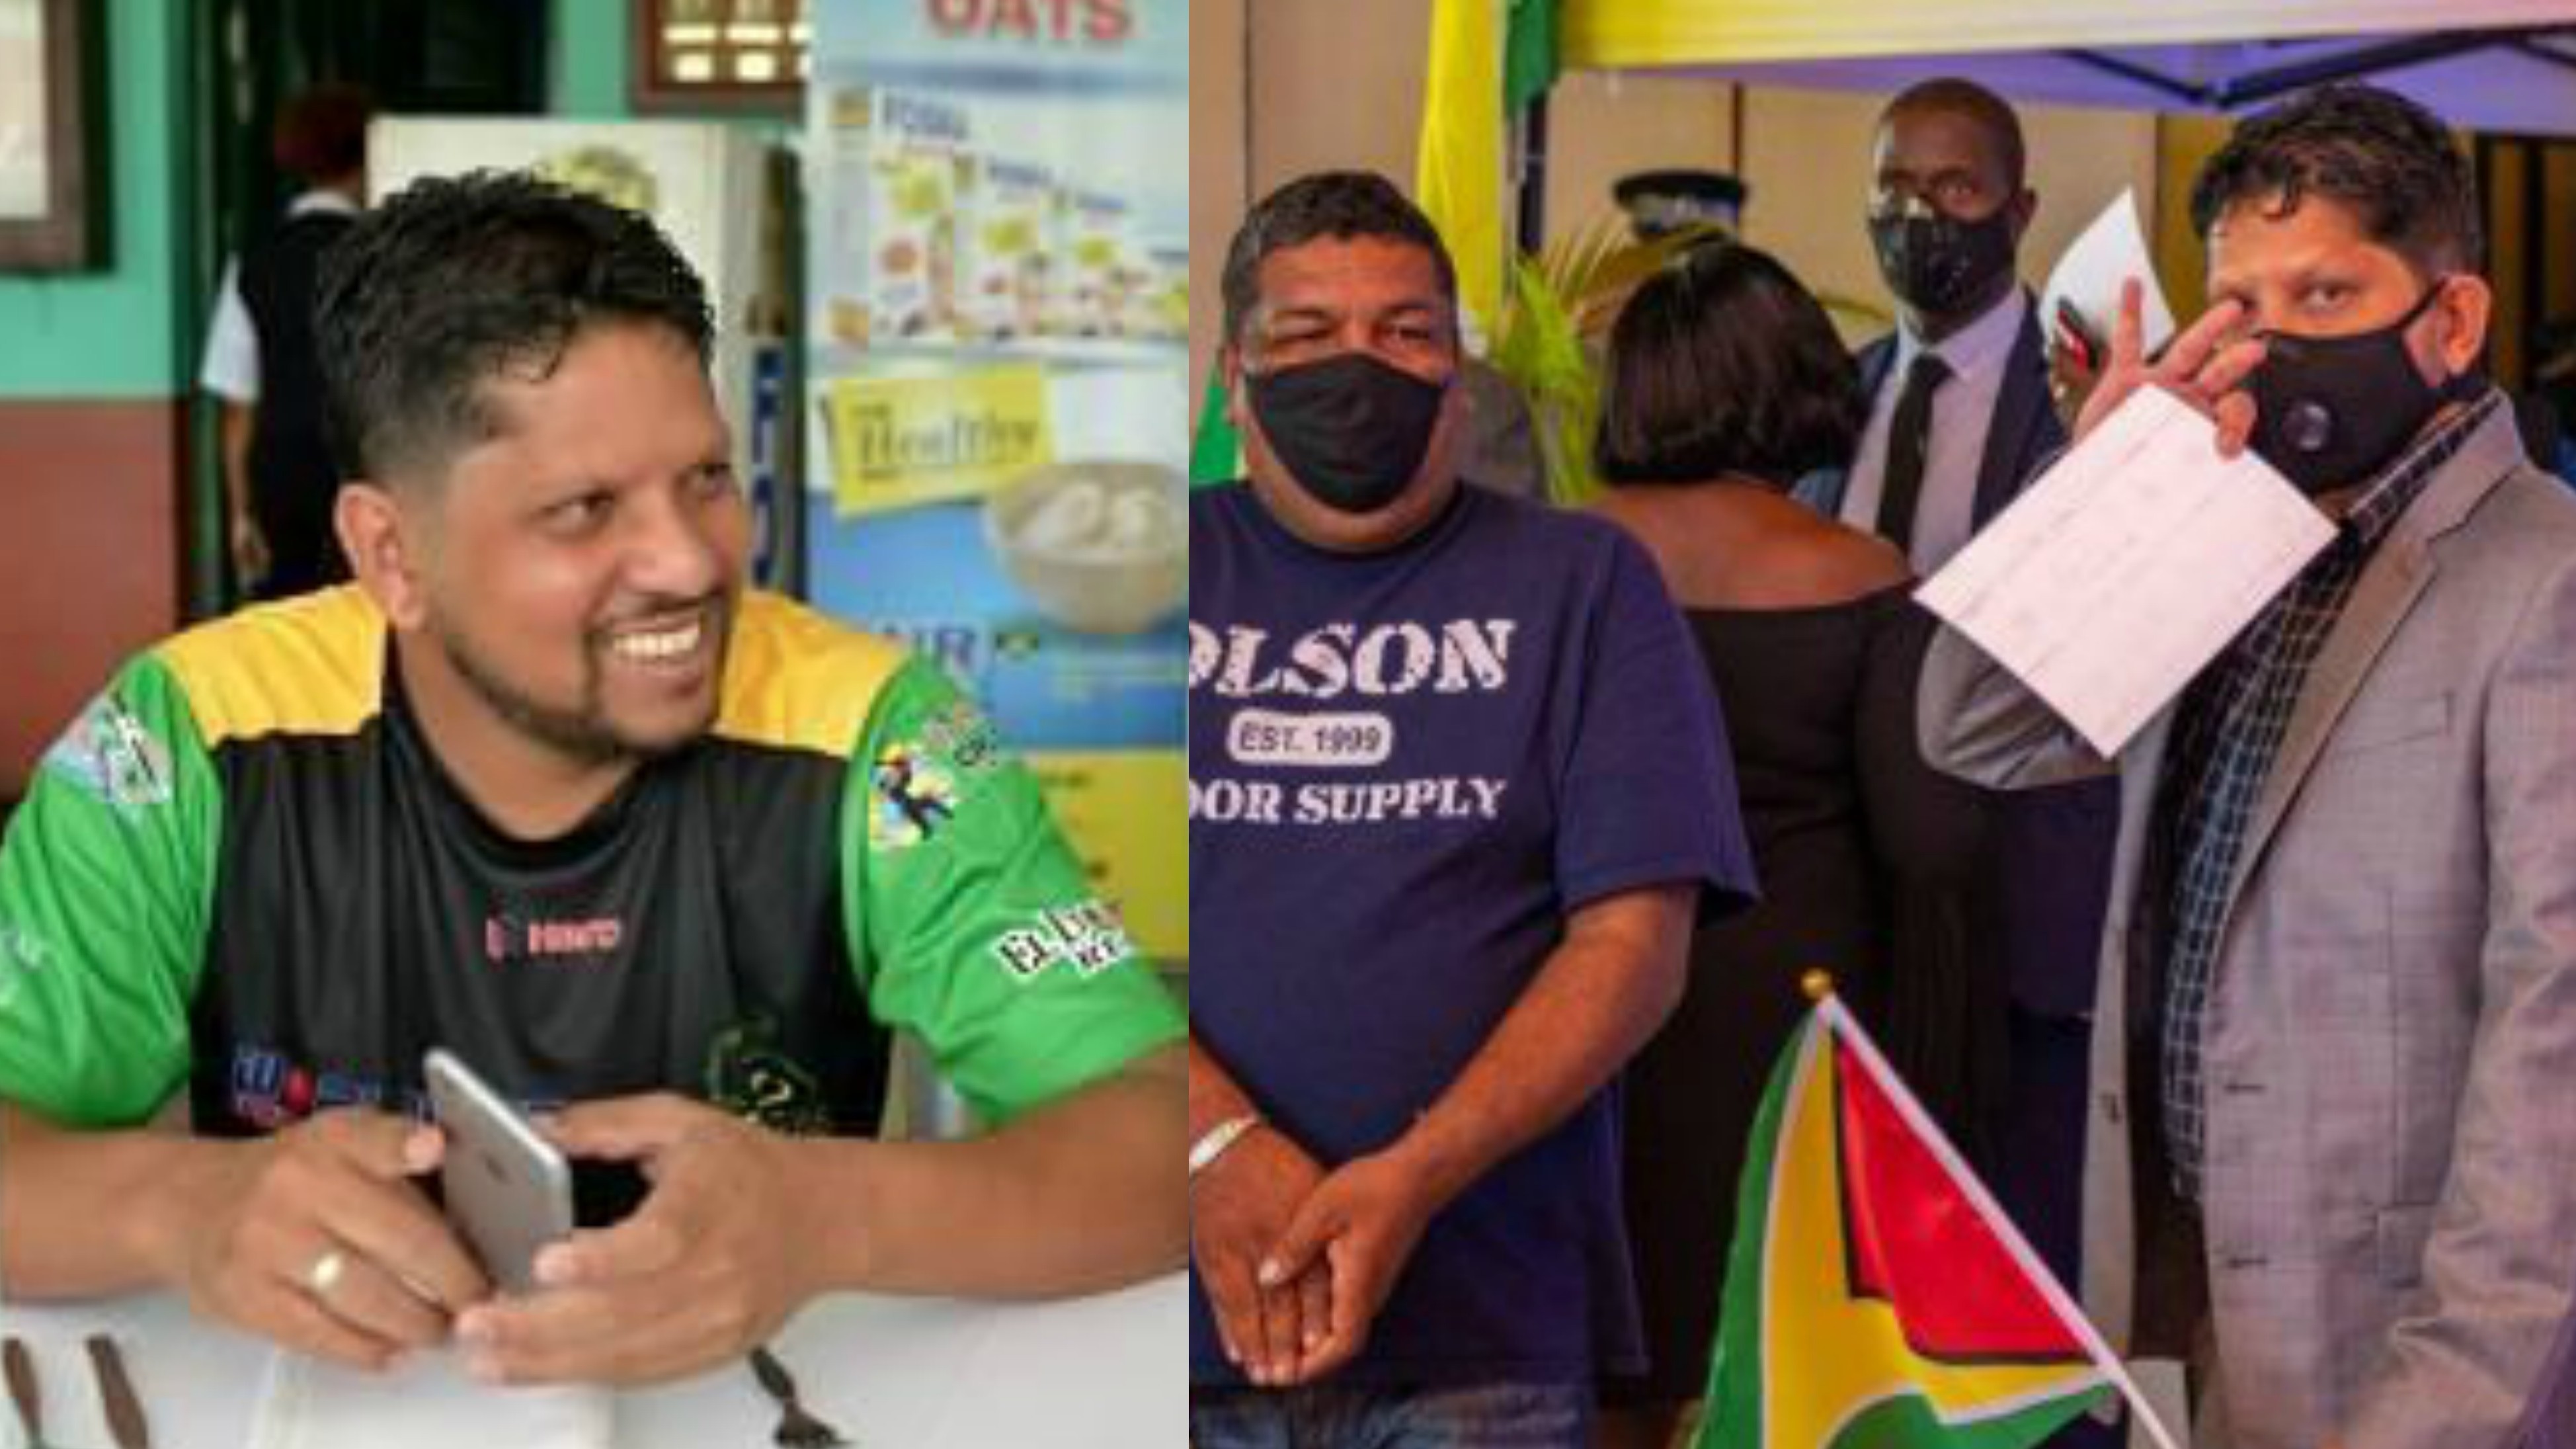 CPL 2020: Ramnaresh Sarwan withdraws from upcoming CPL due to personal reasons